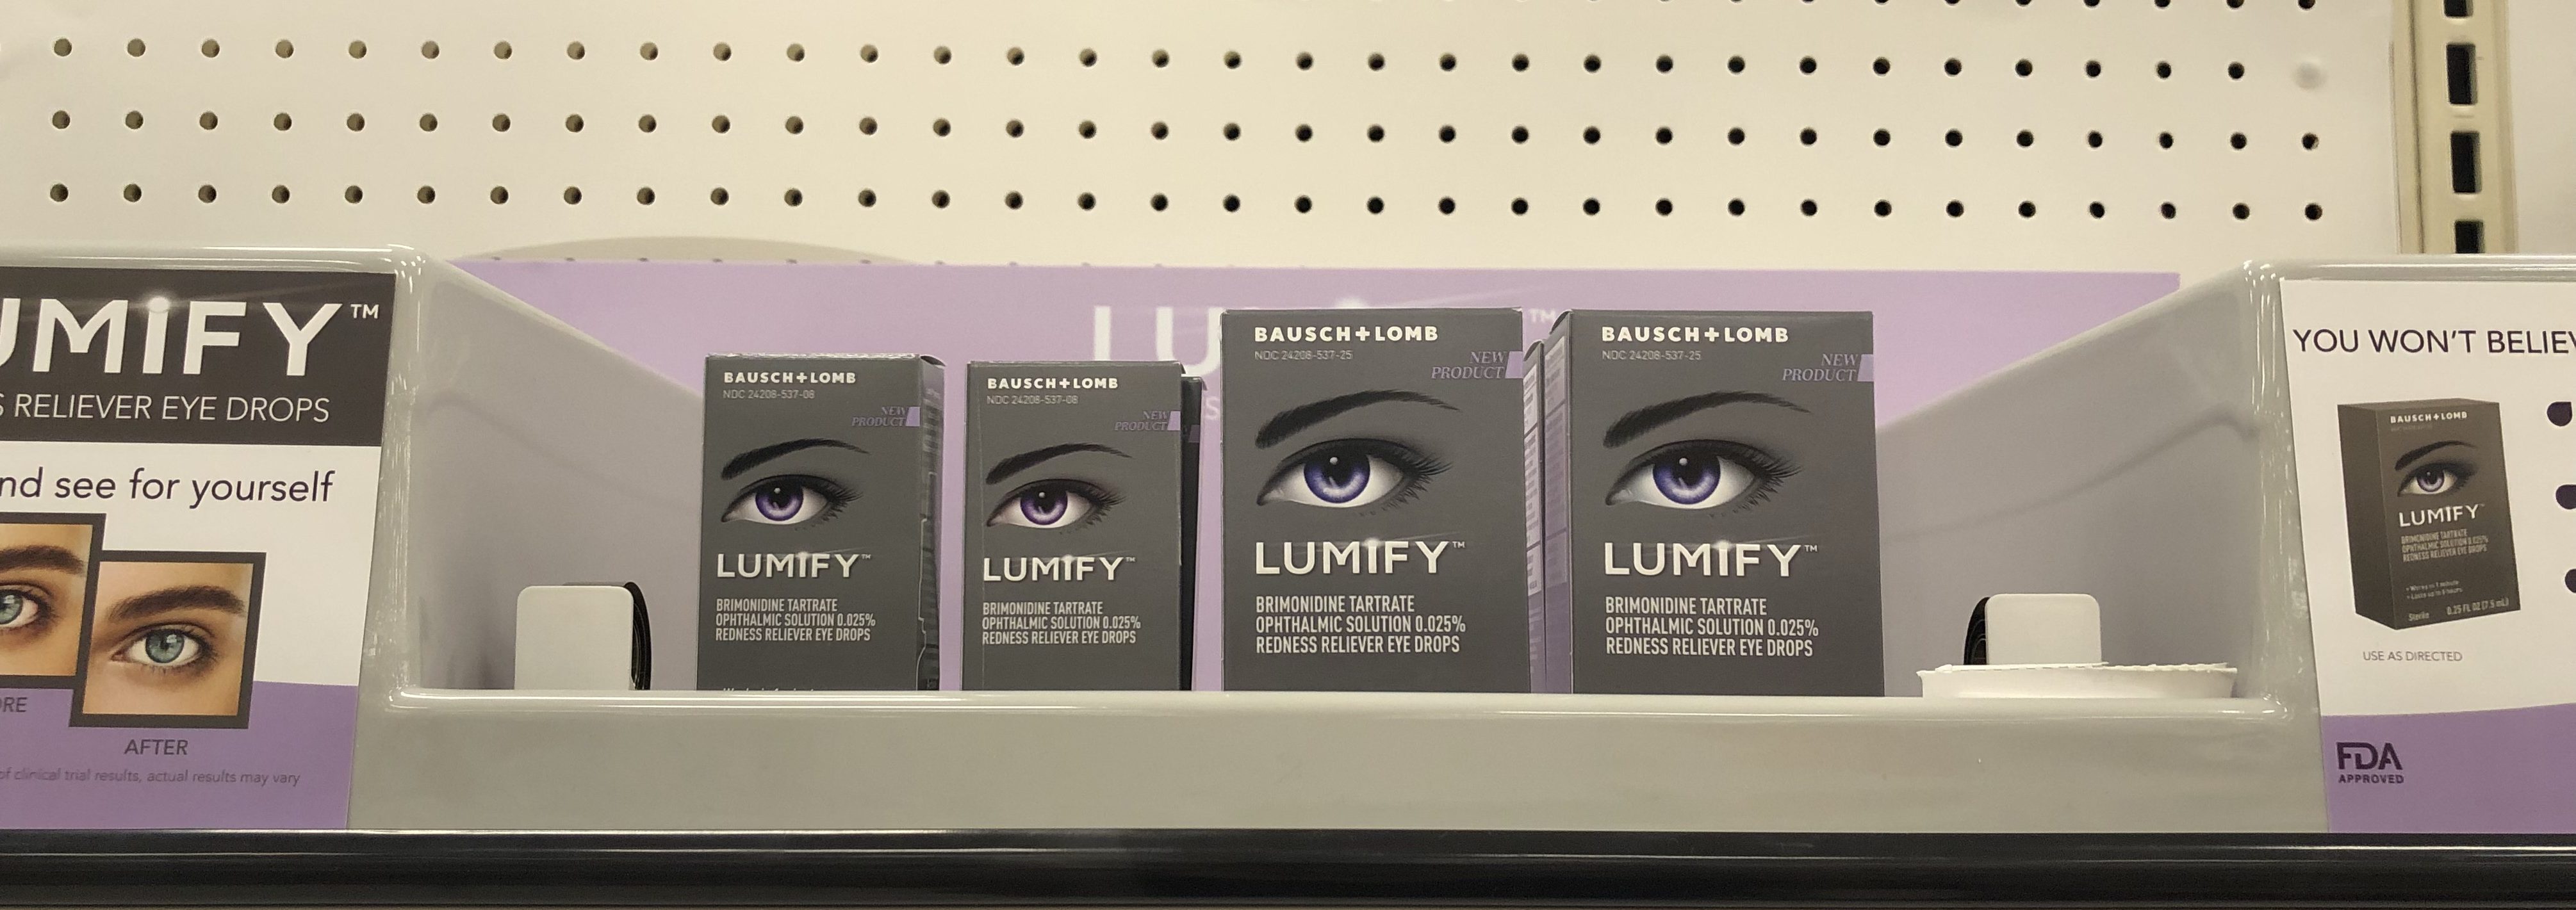 6 Worth of New LUMIFY Eye Drops Coupons